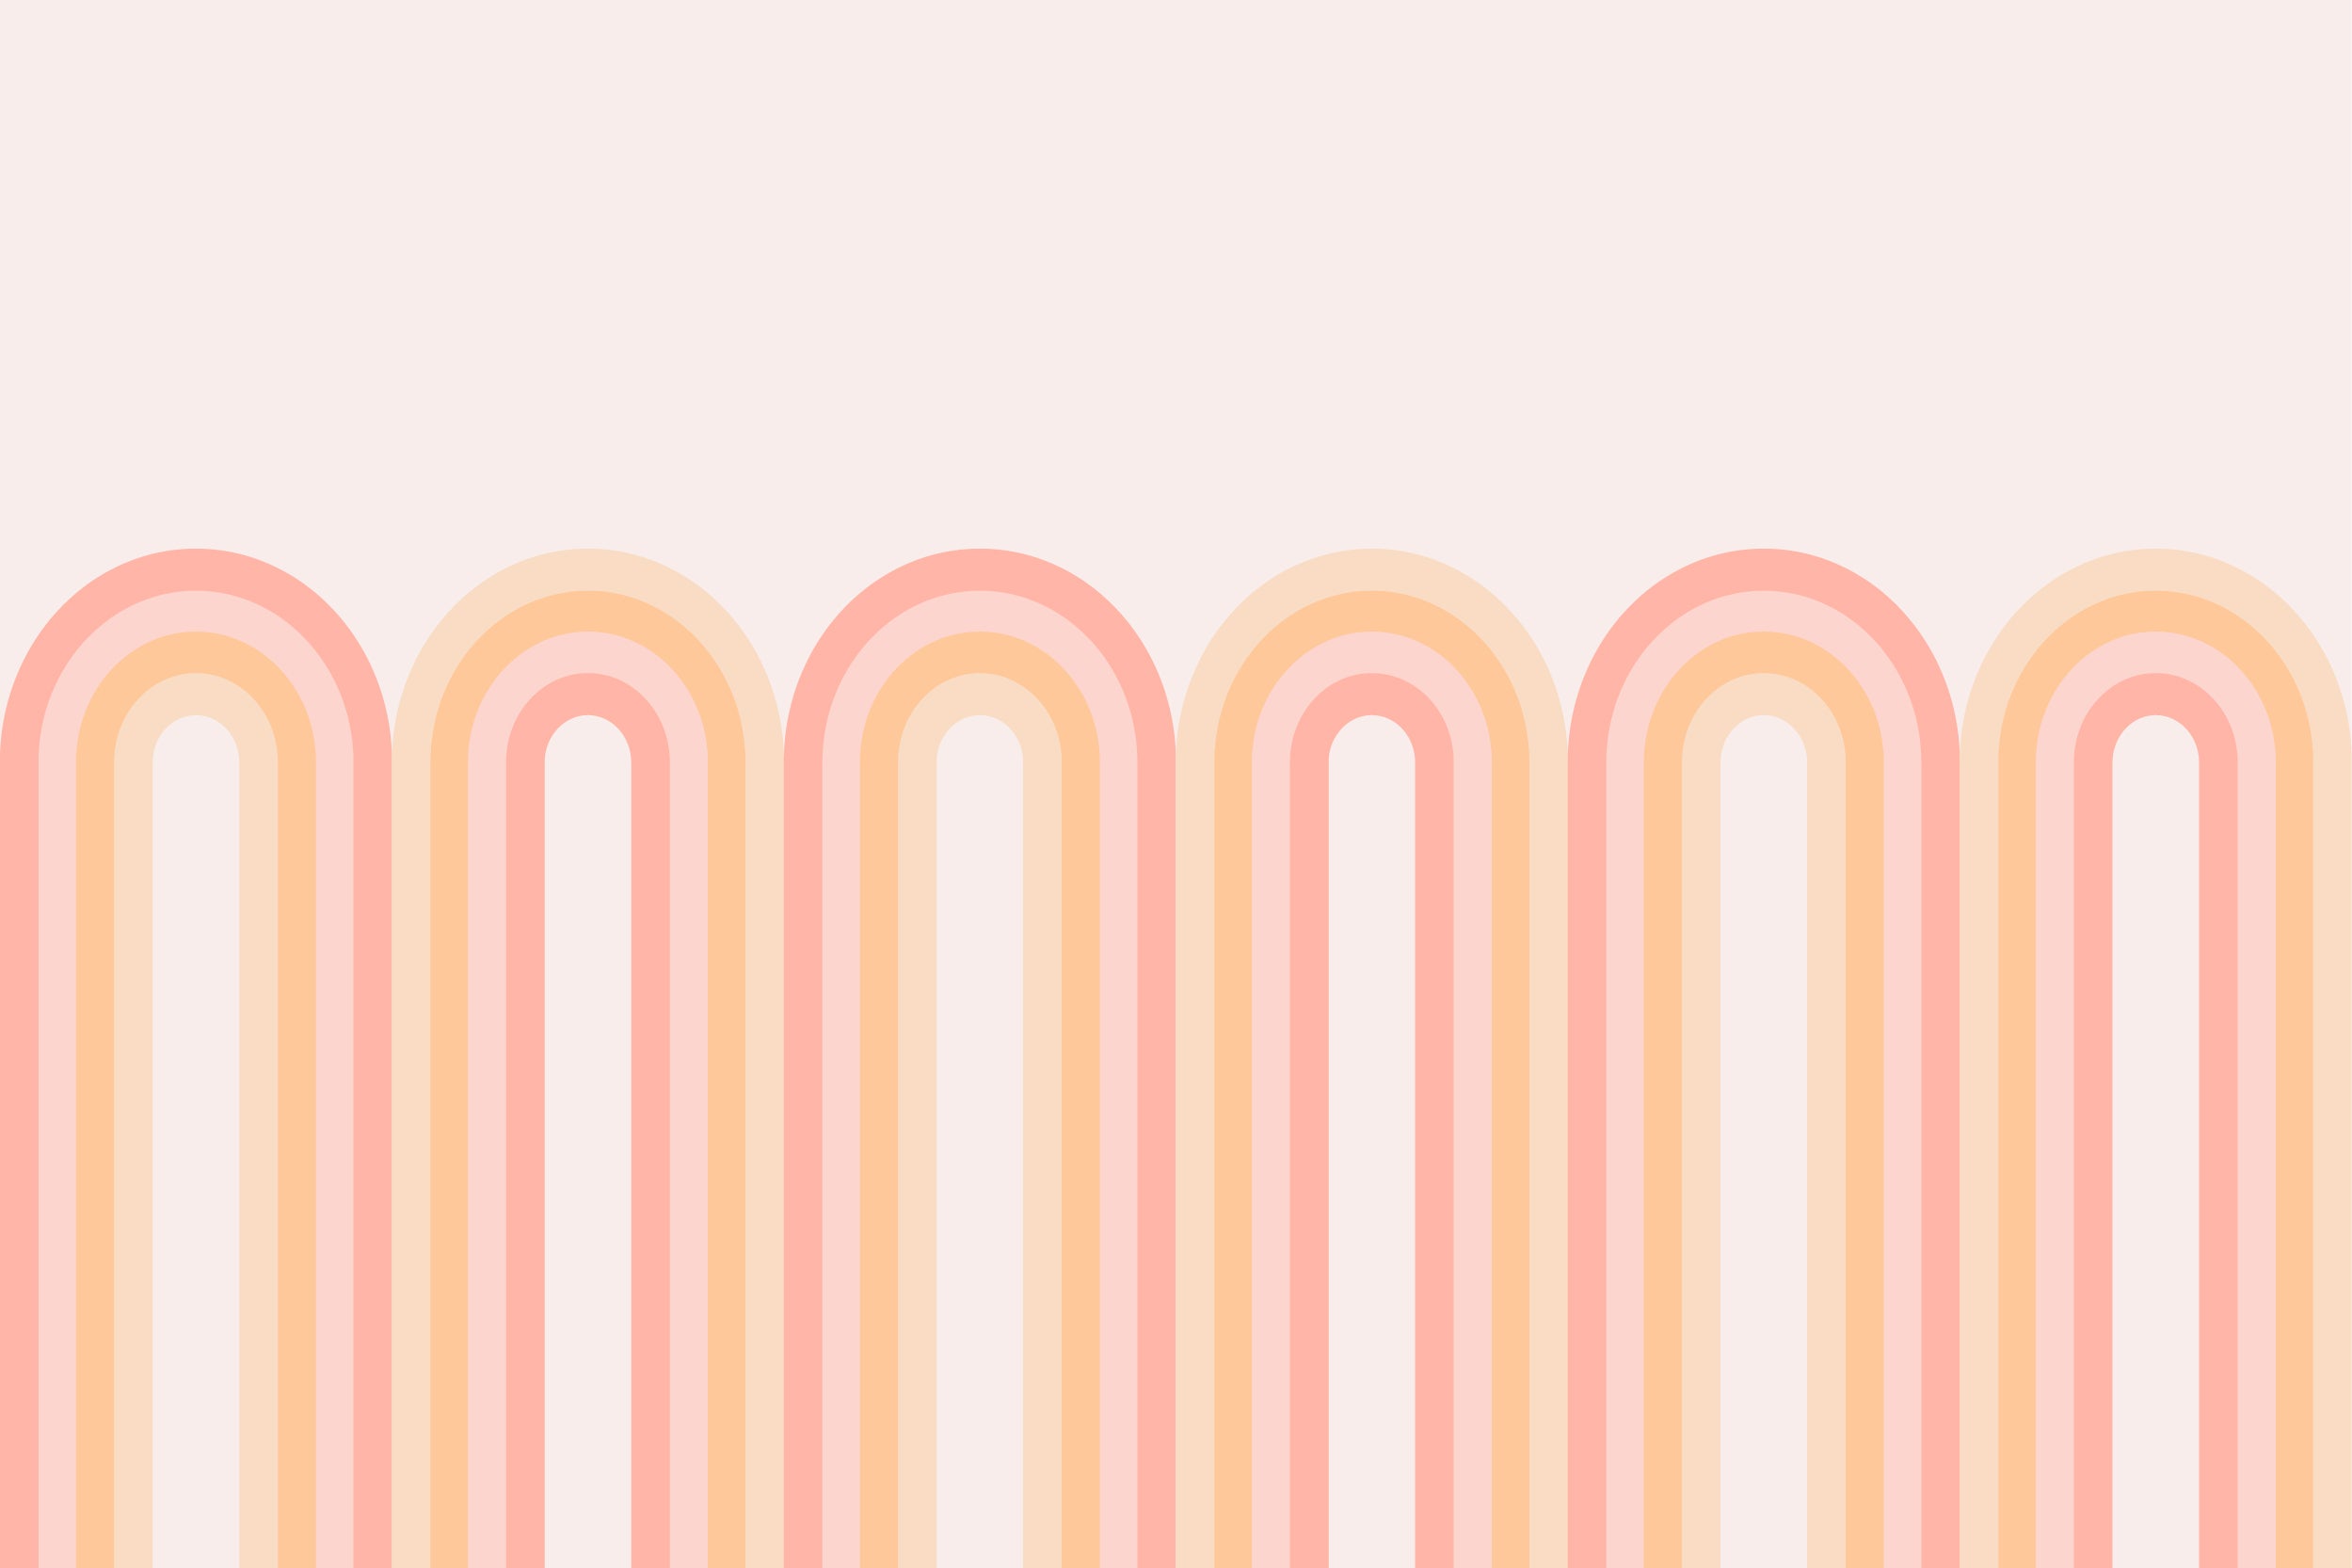 Archie Peach - Yellow & Pink Repeat Arches Wallpaper Mural Full Artwork